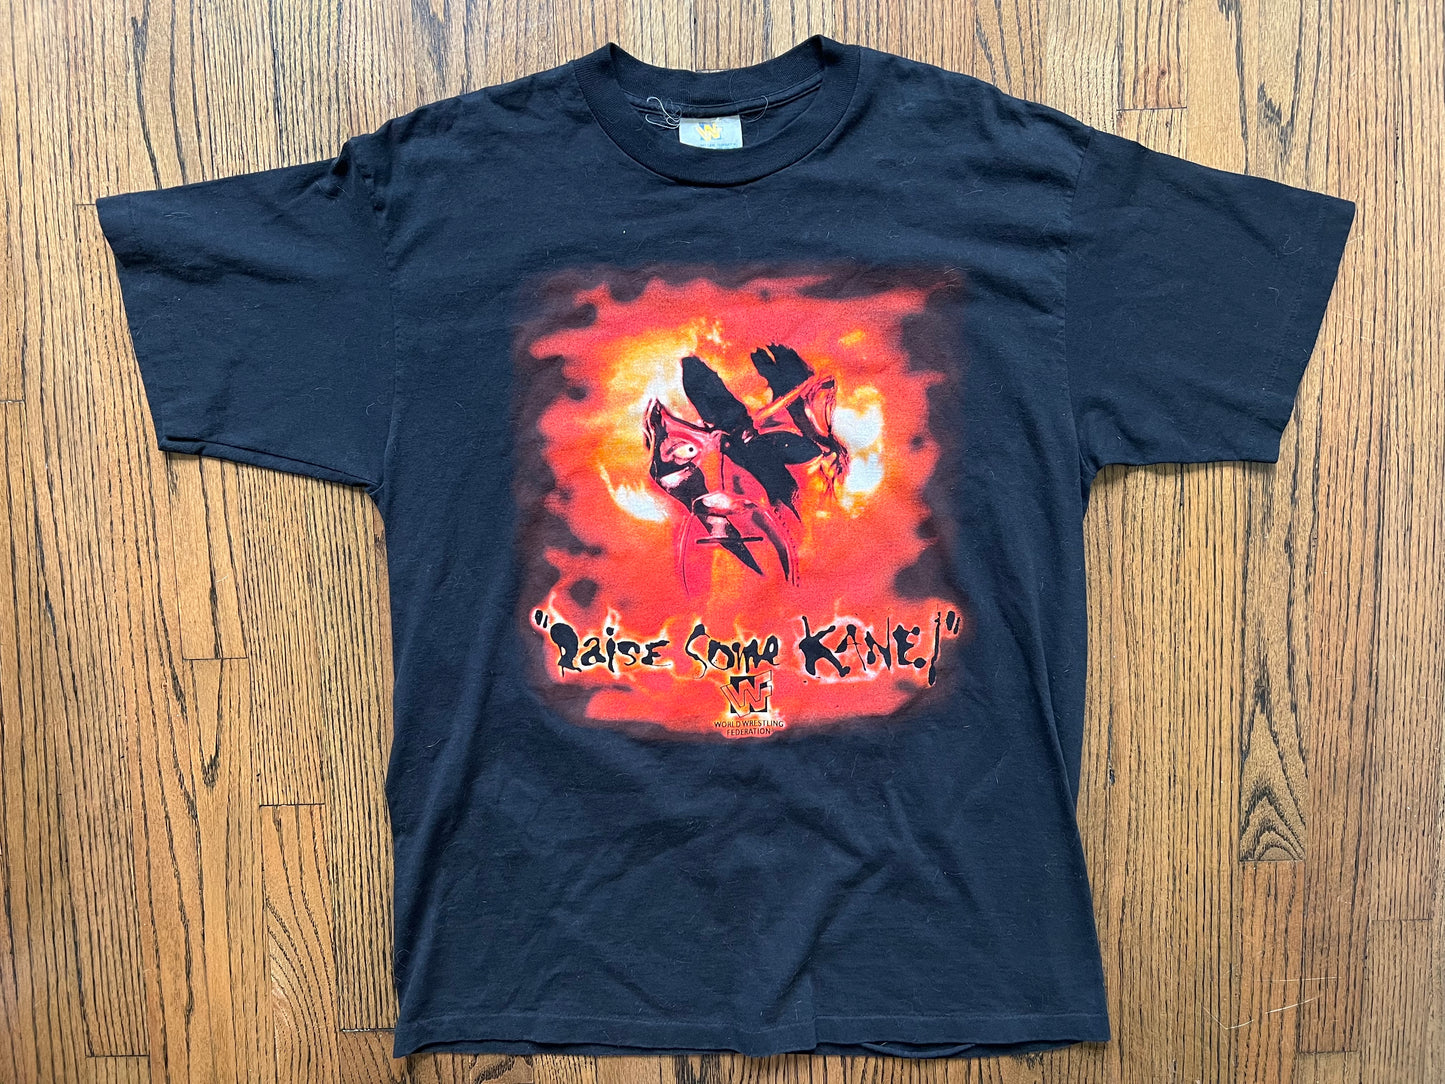 1998 WWF Kane “Welcome to Hell” shirt